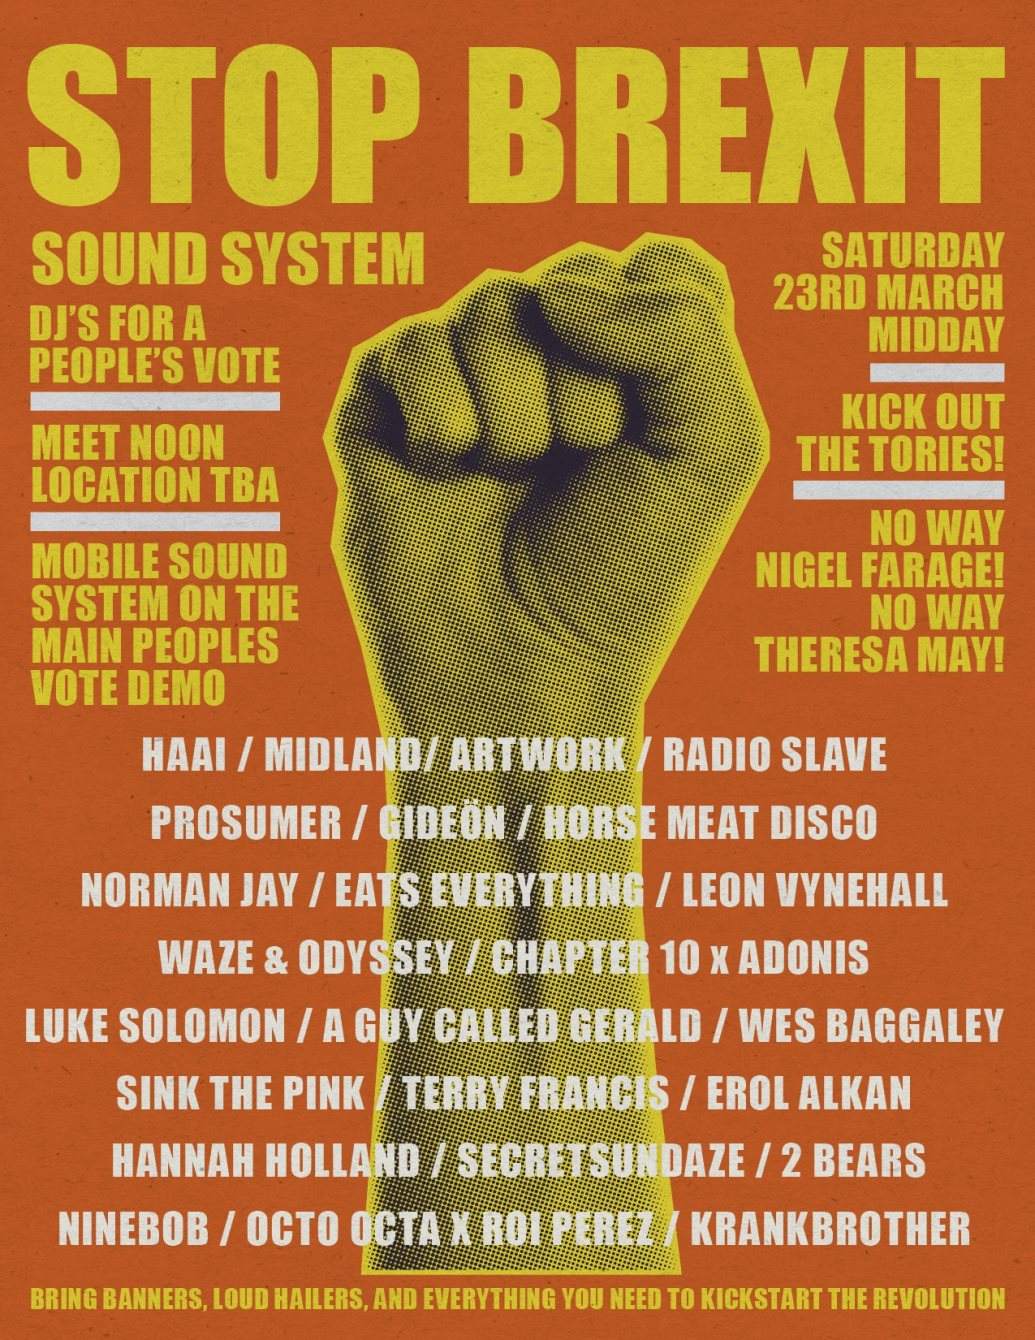 Stop Brexit - Stop Brexit - DJs For A People's Vote - フライヤー表